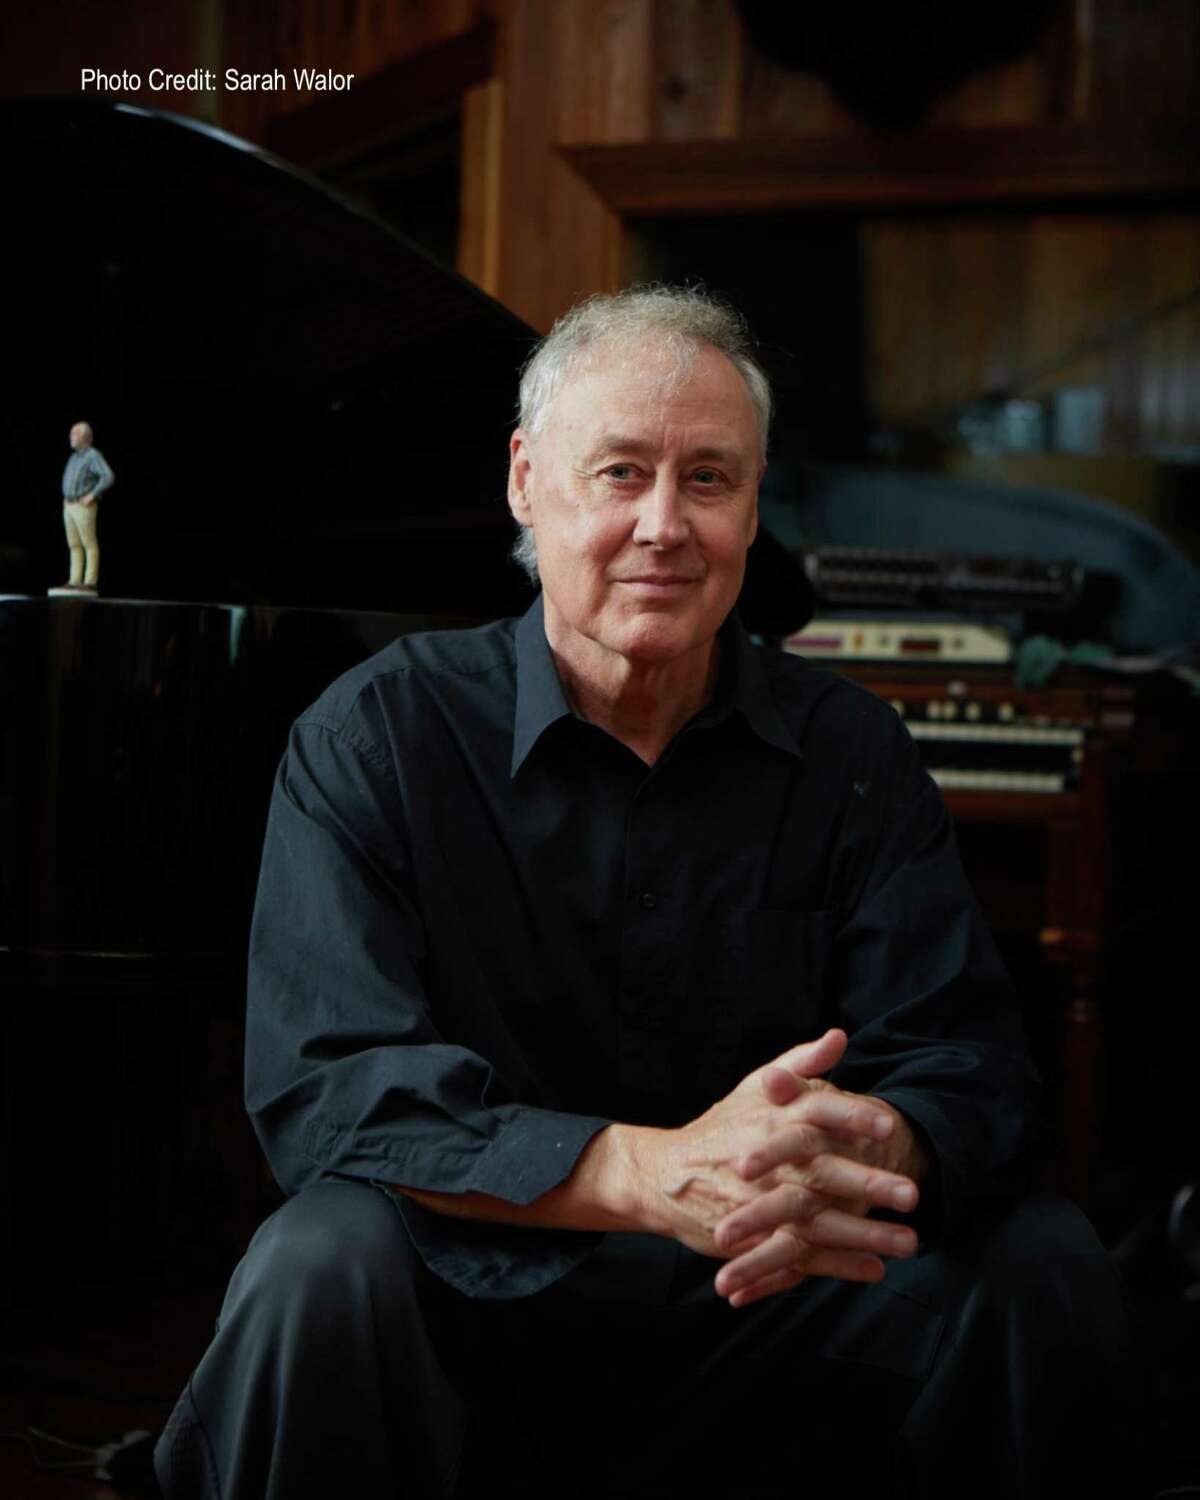 Bruce Hornsby will perform live at the Ridgefield Playhouse on Oct. 3 in celebration of the venue's 20th anniversary.